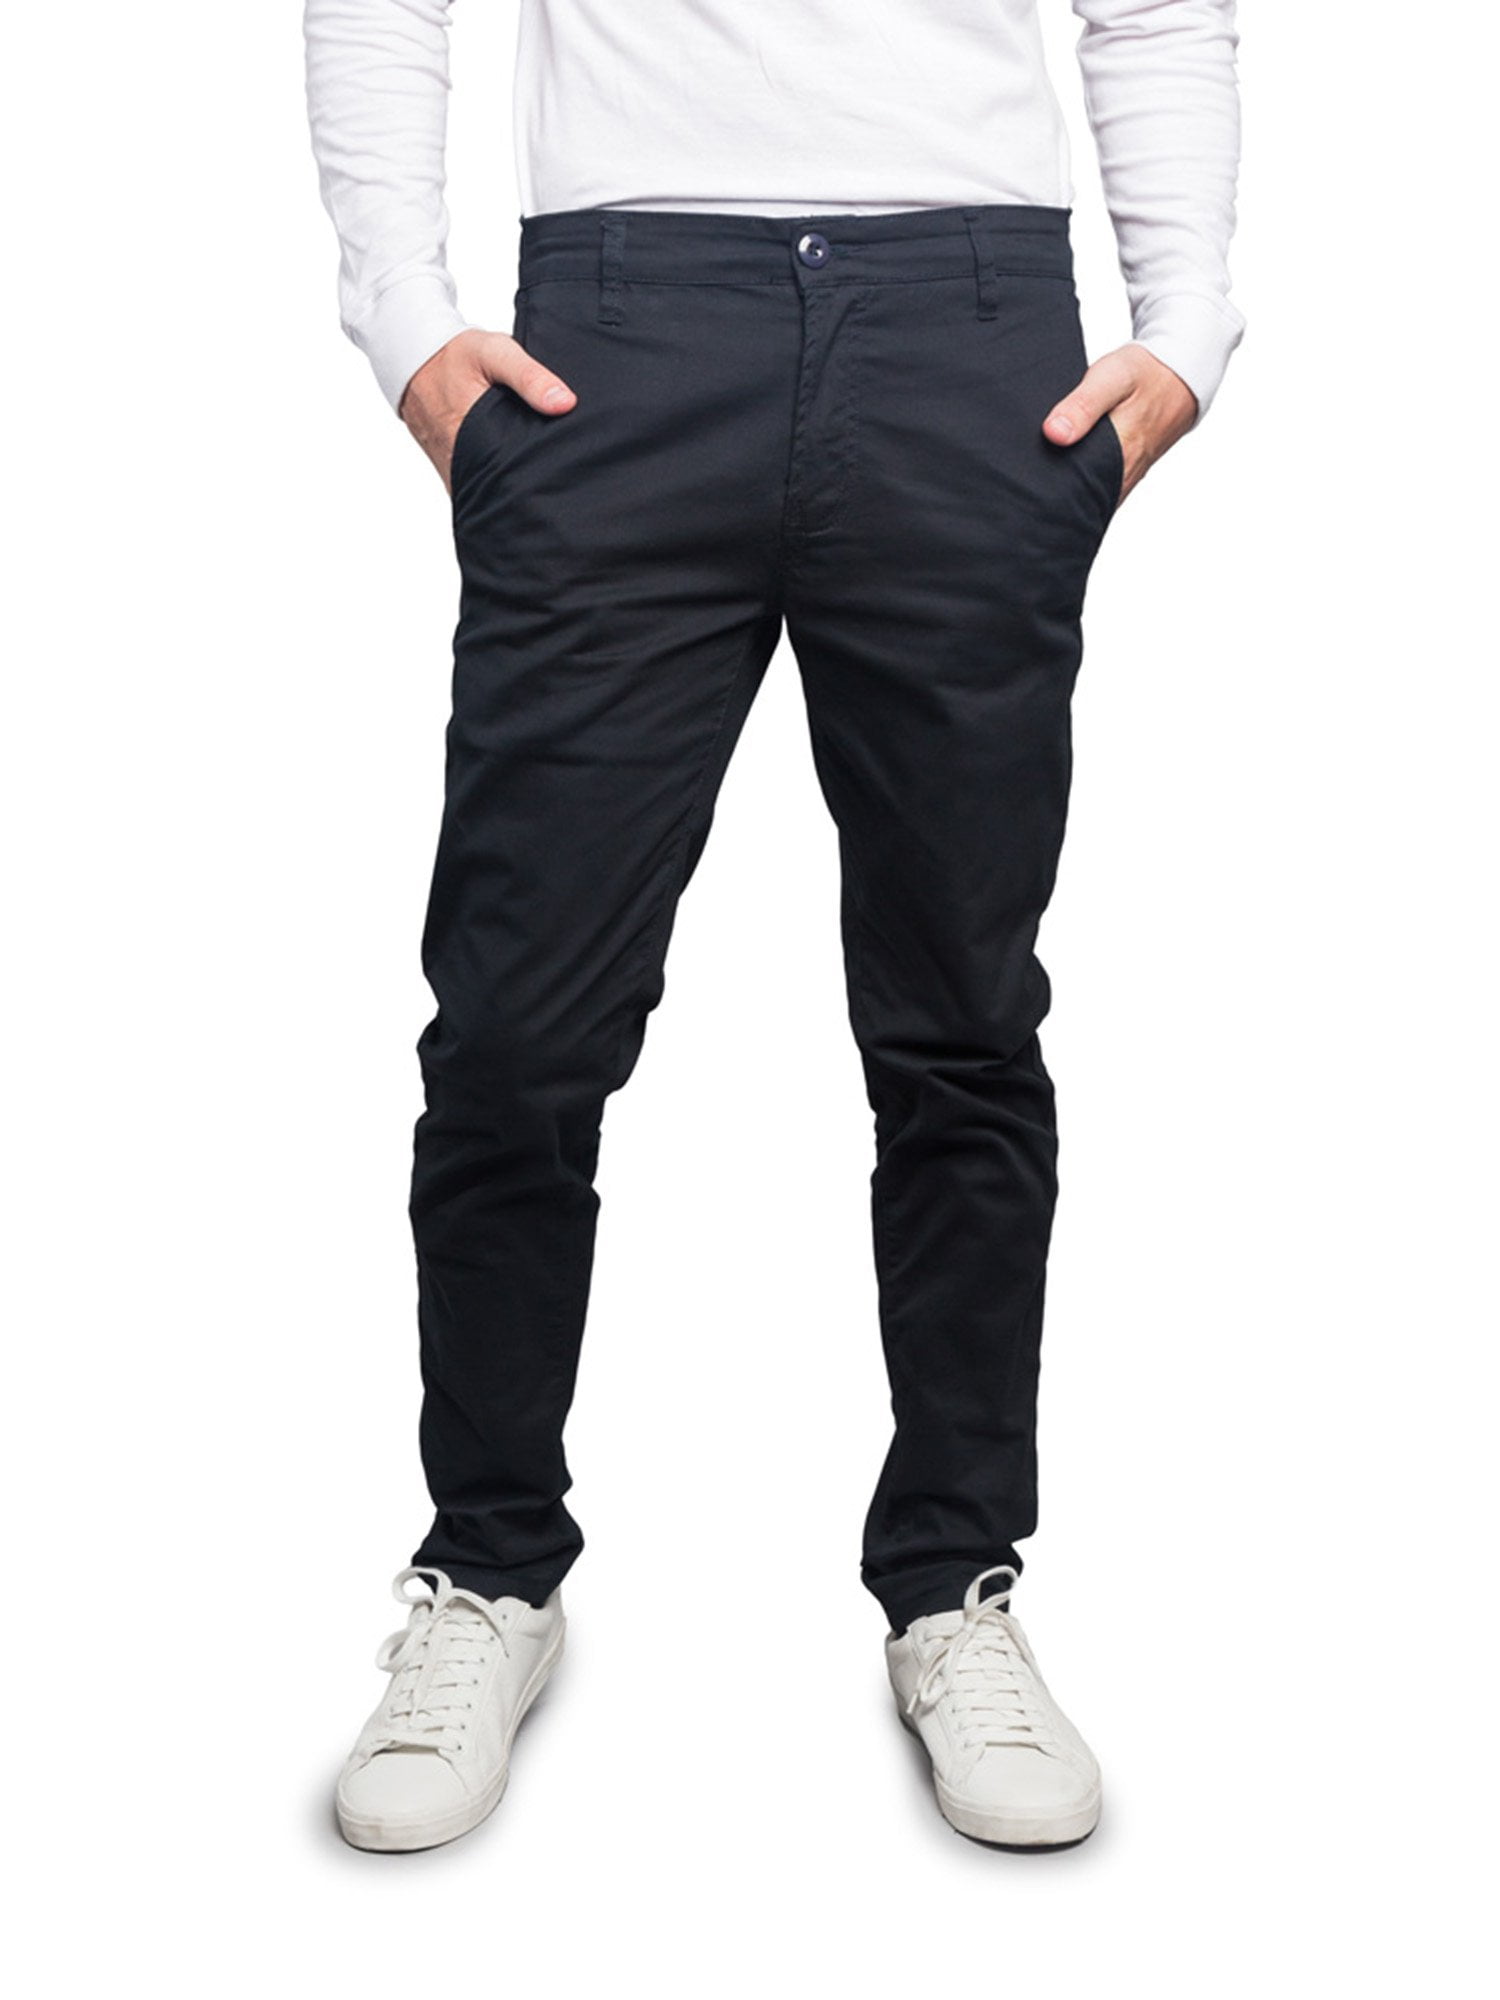 Victorious Men's Basic Casual Slim Fit Stretch Chino Pants 